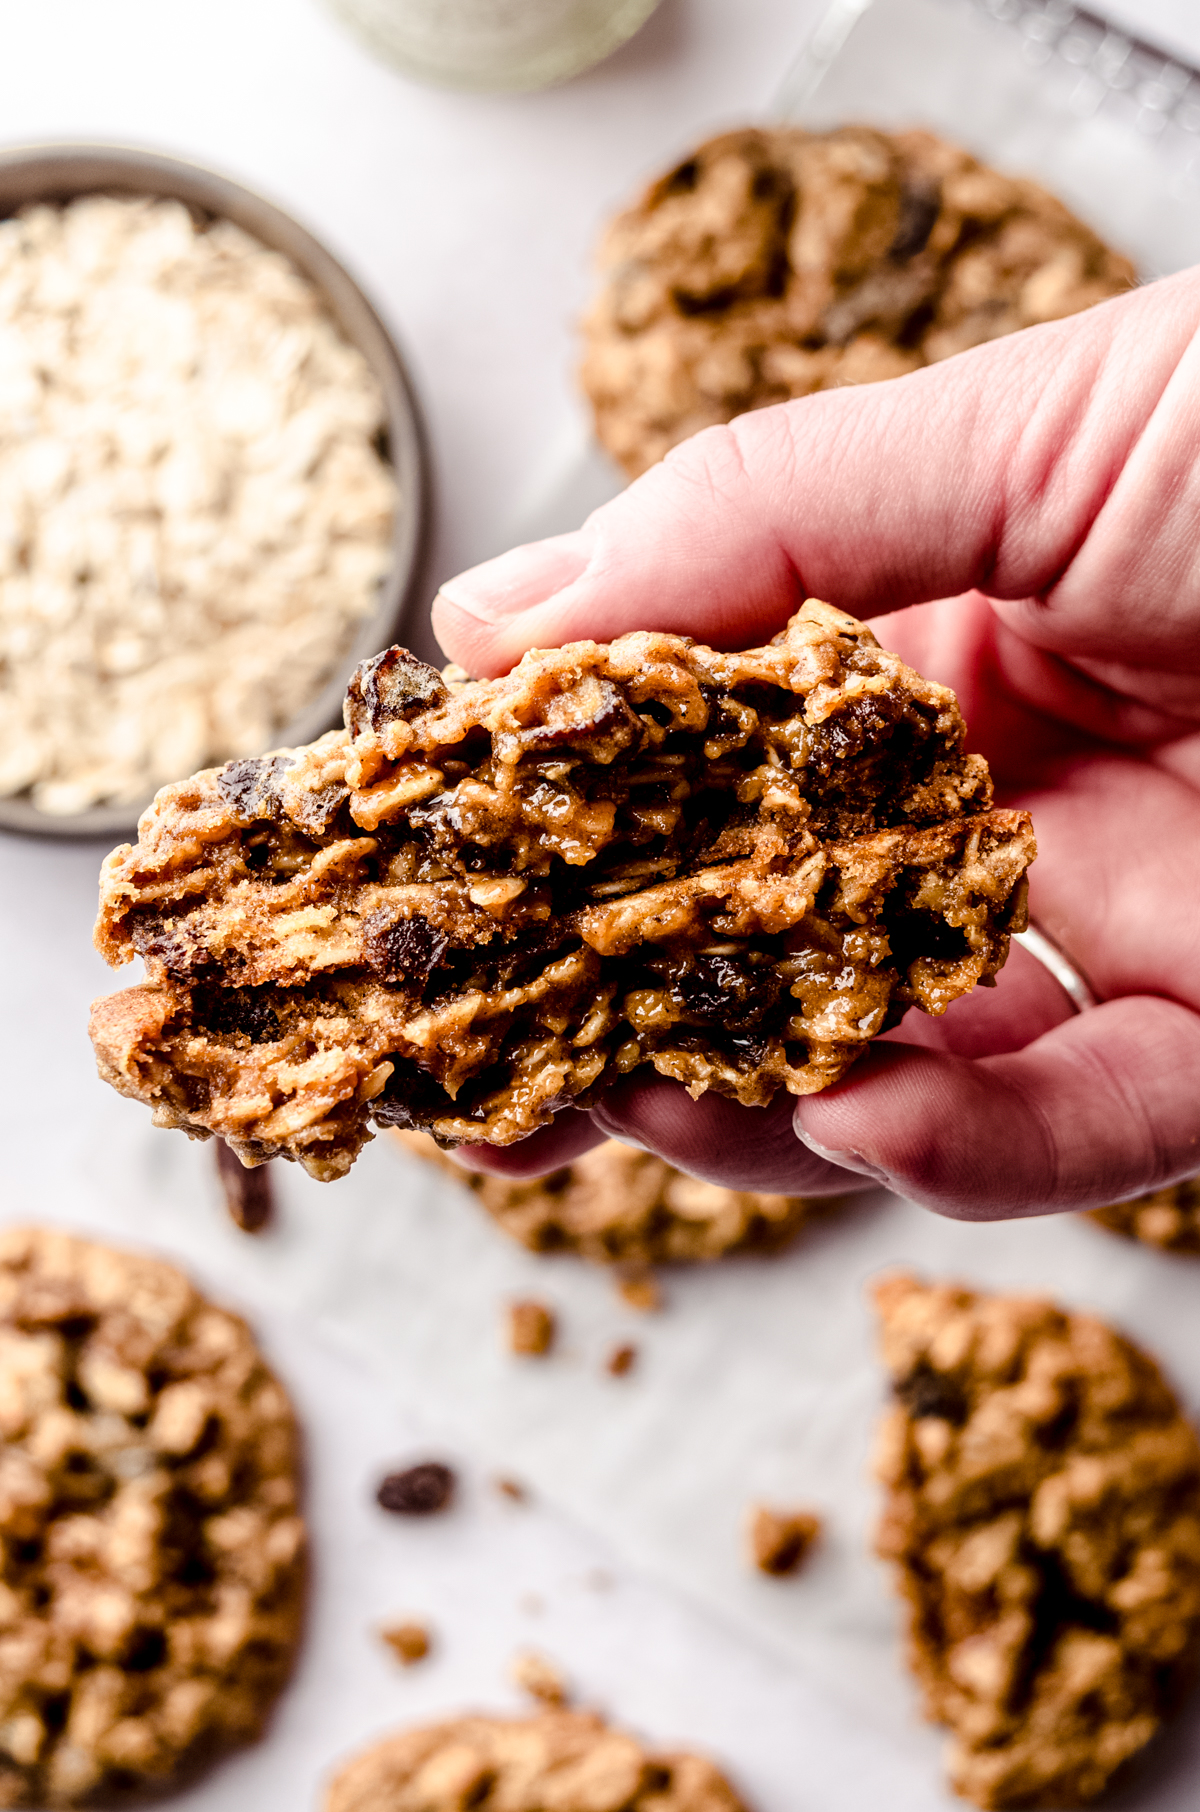 A hand holding a chewy oatmeal raisin cookie that has been broken in half so you can see the gooey inside.